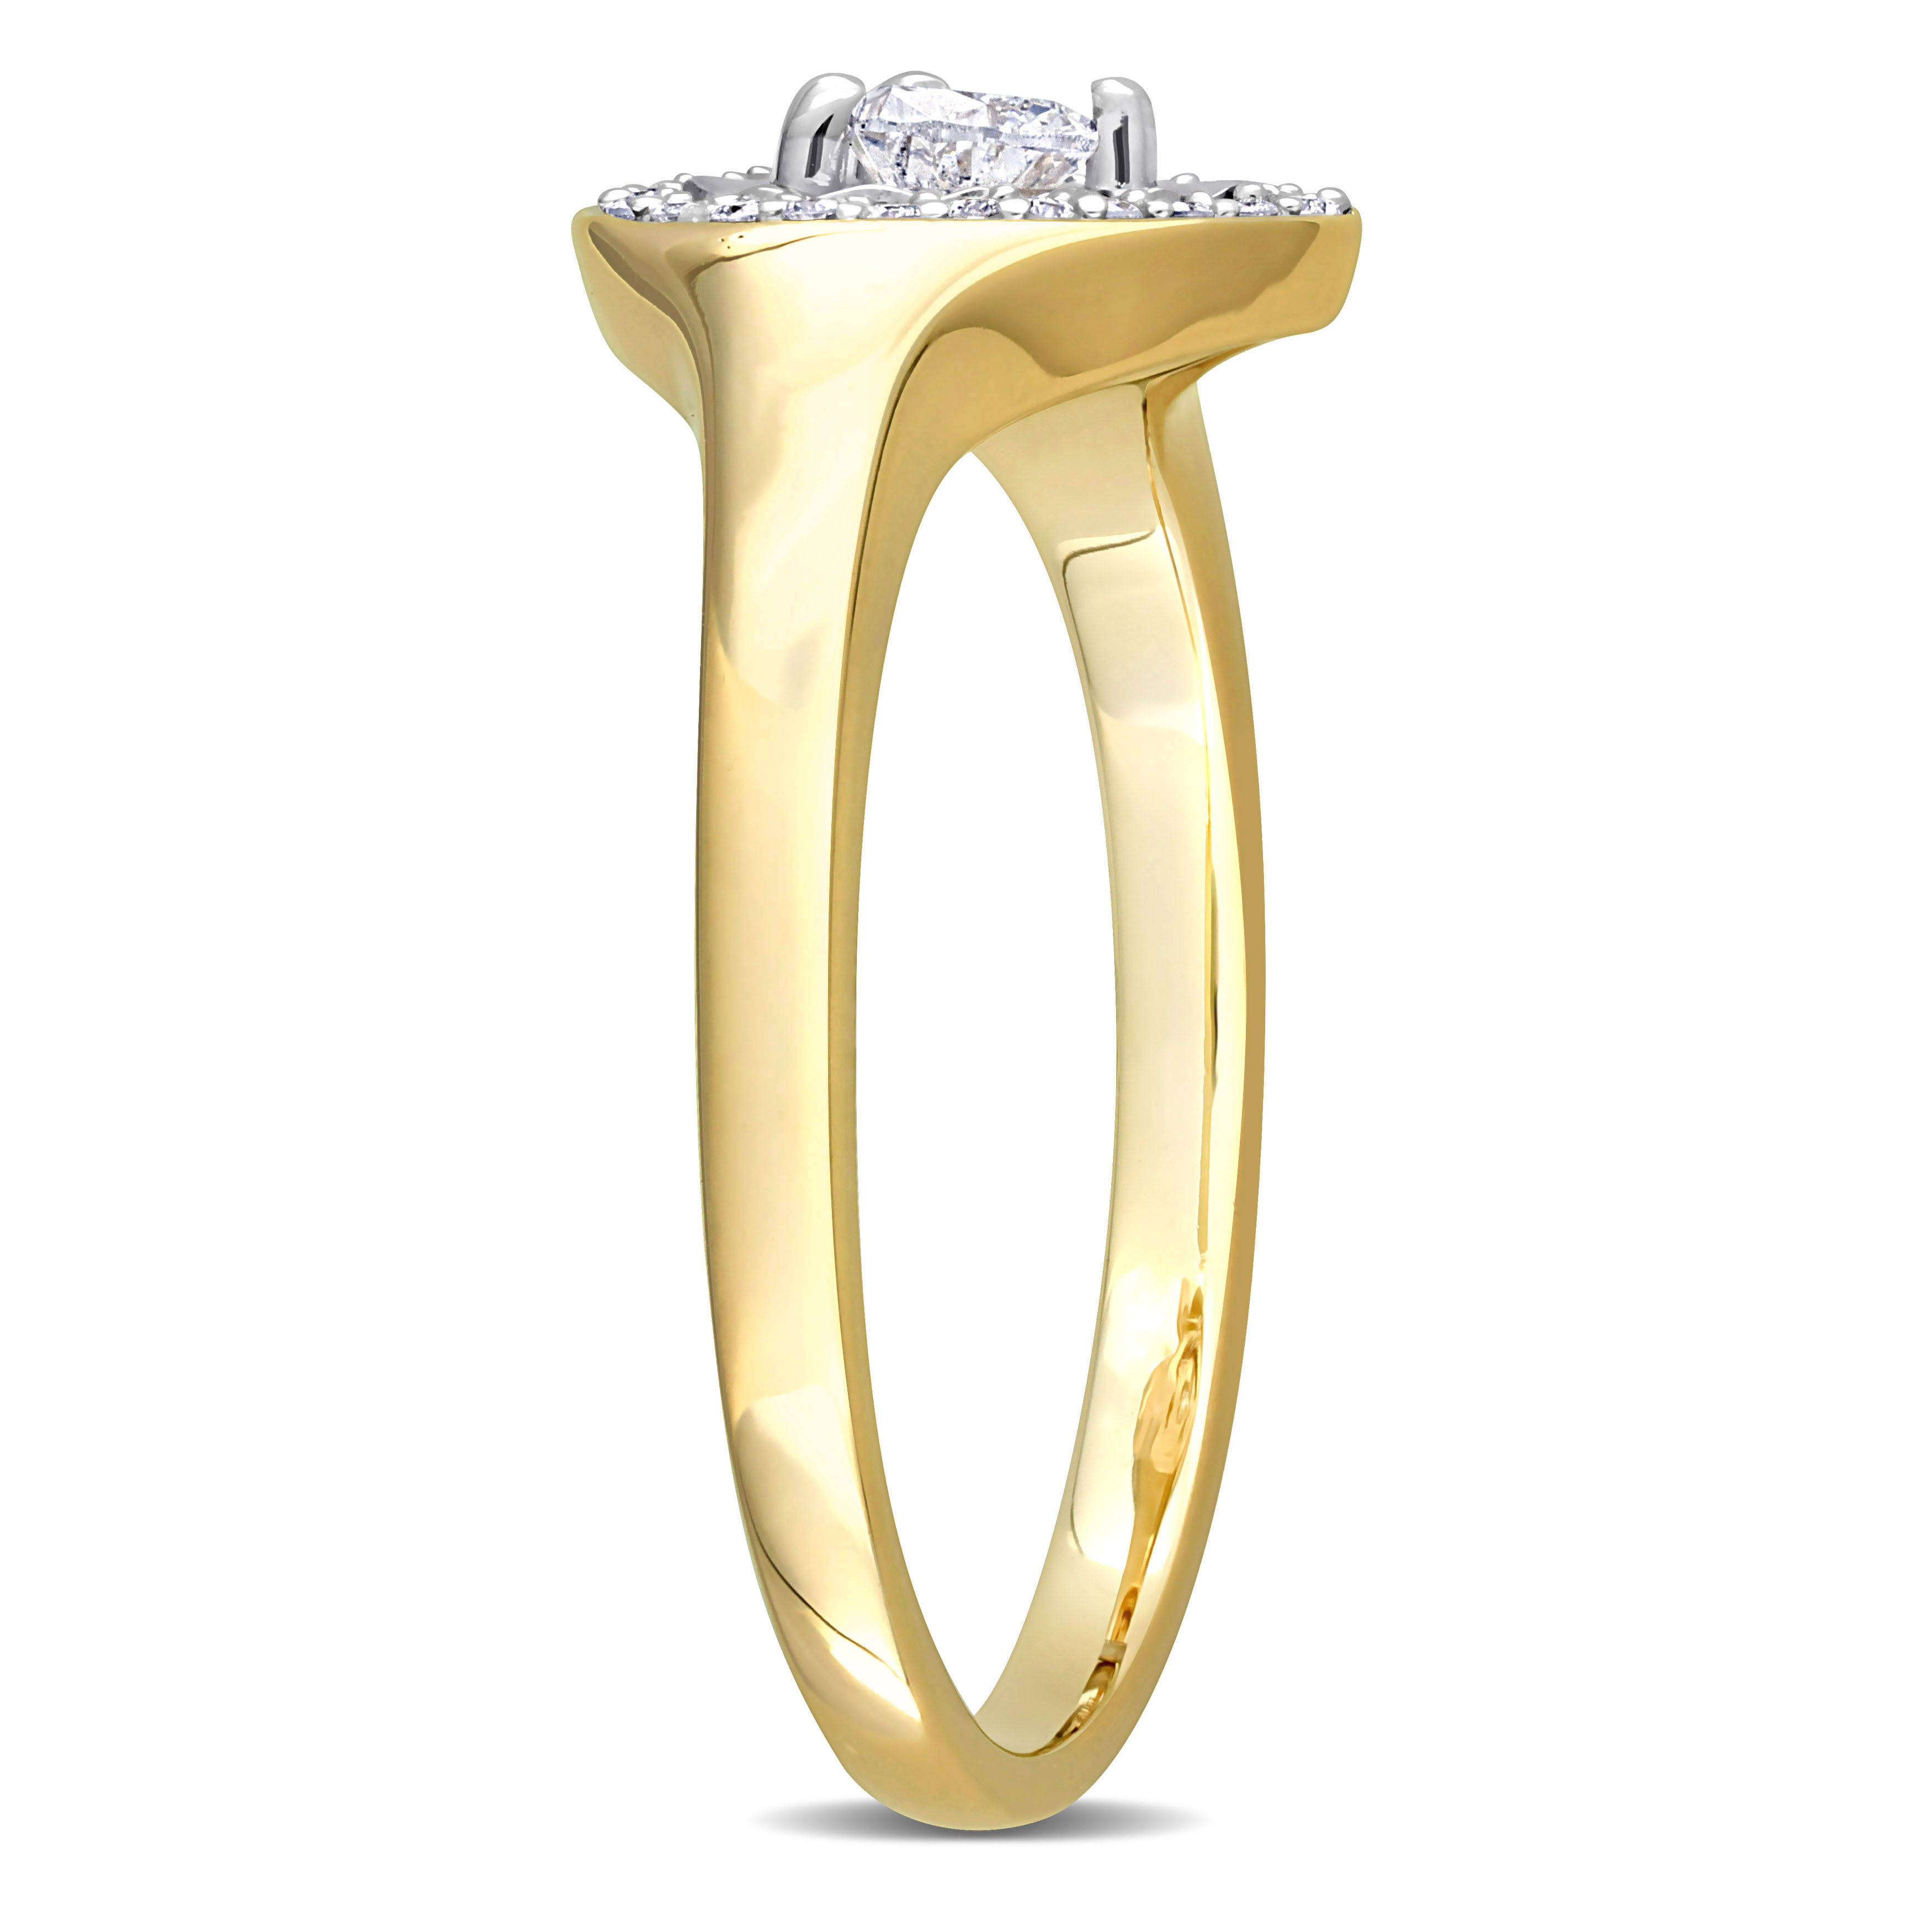 1/4 CT TW Heart & Round Shape Diamond Halo Engagement Ring in 14k Yellow Gold